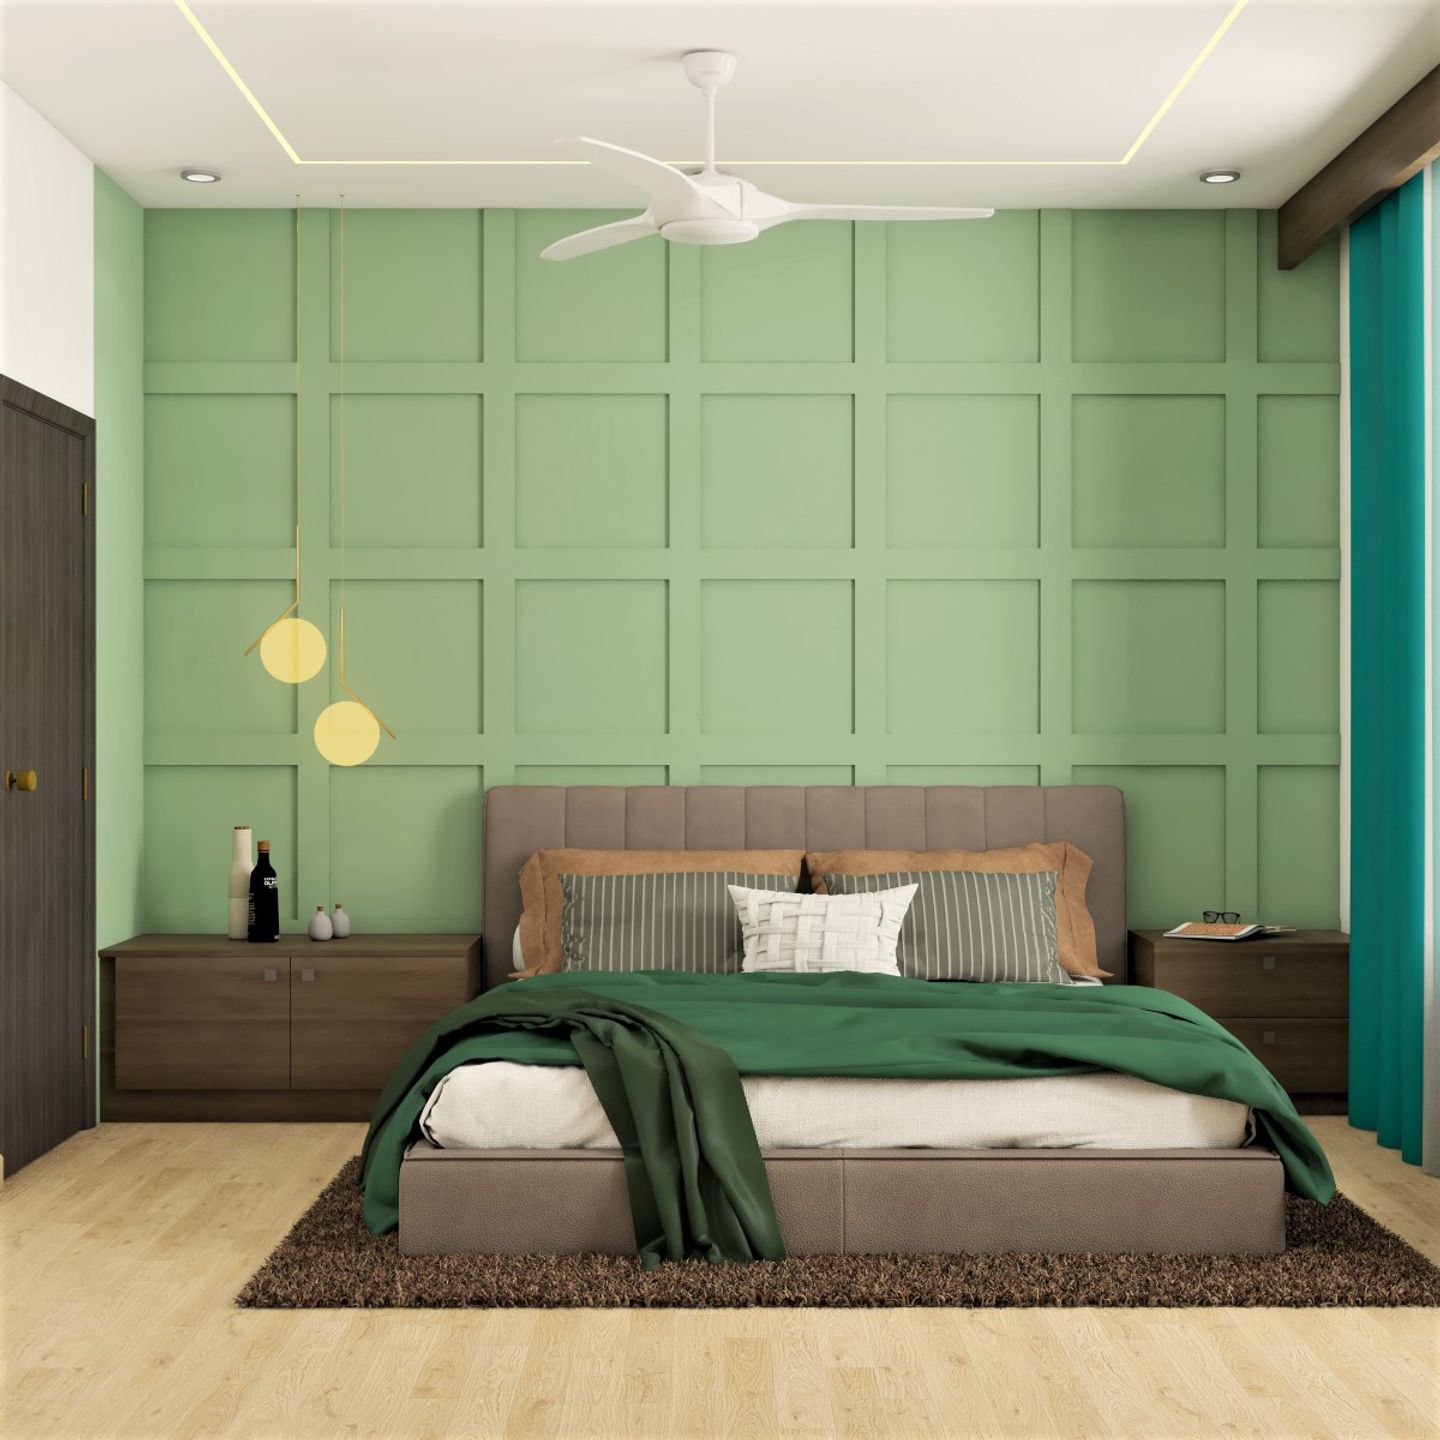 Master Bedroom Design With Green Accent Wall - Livspace